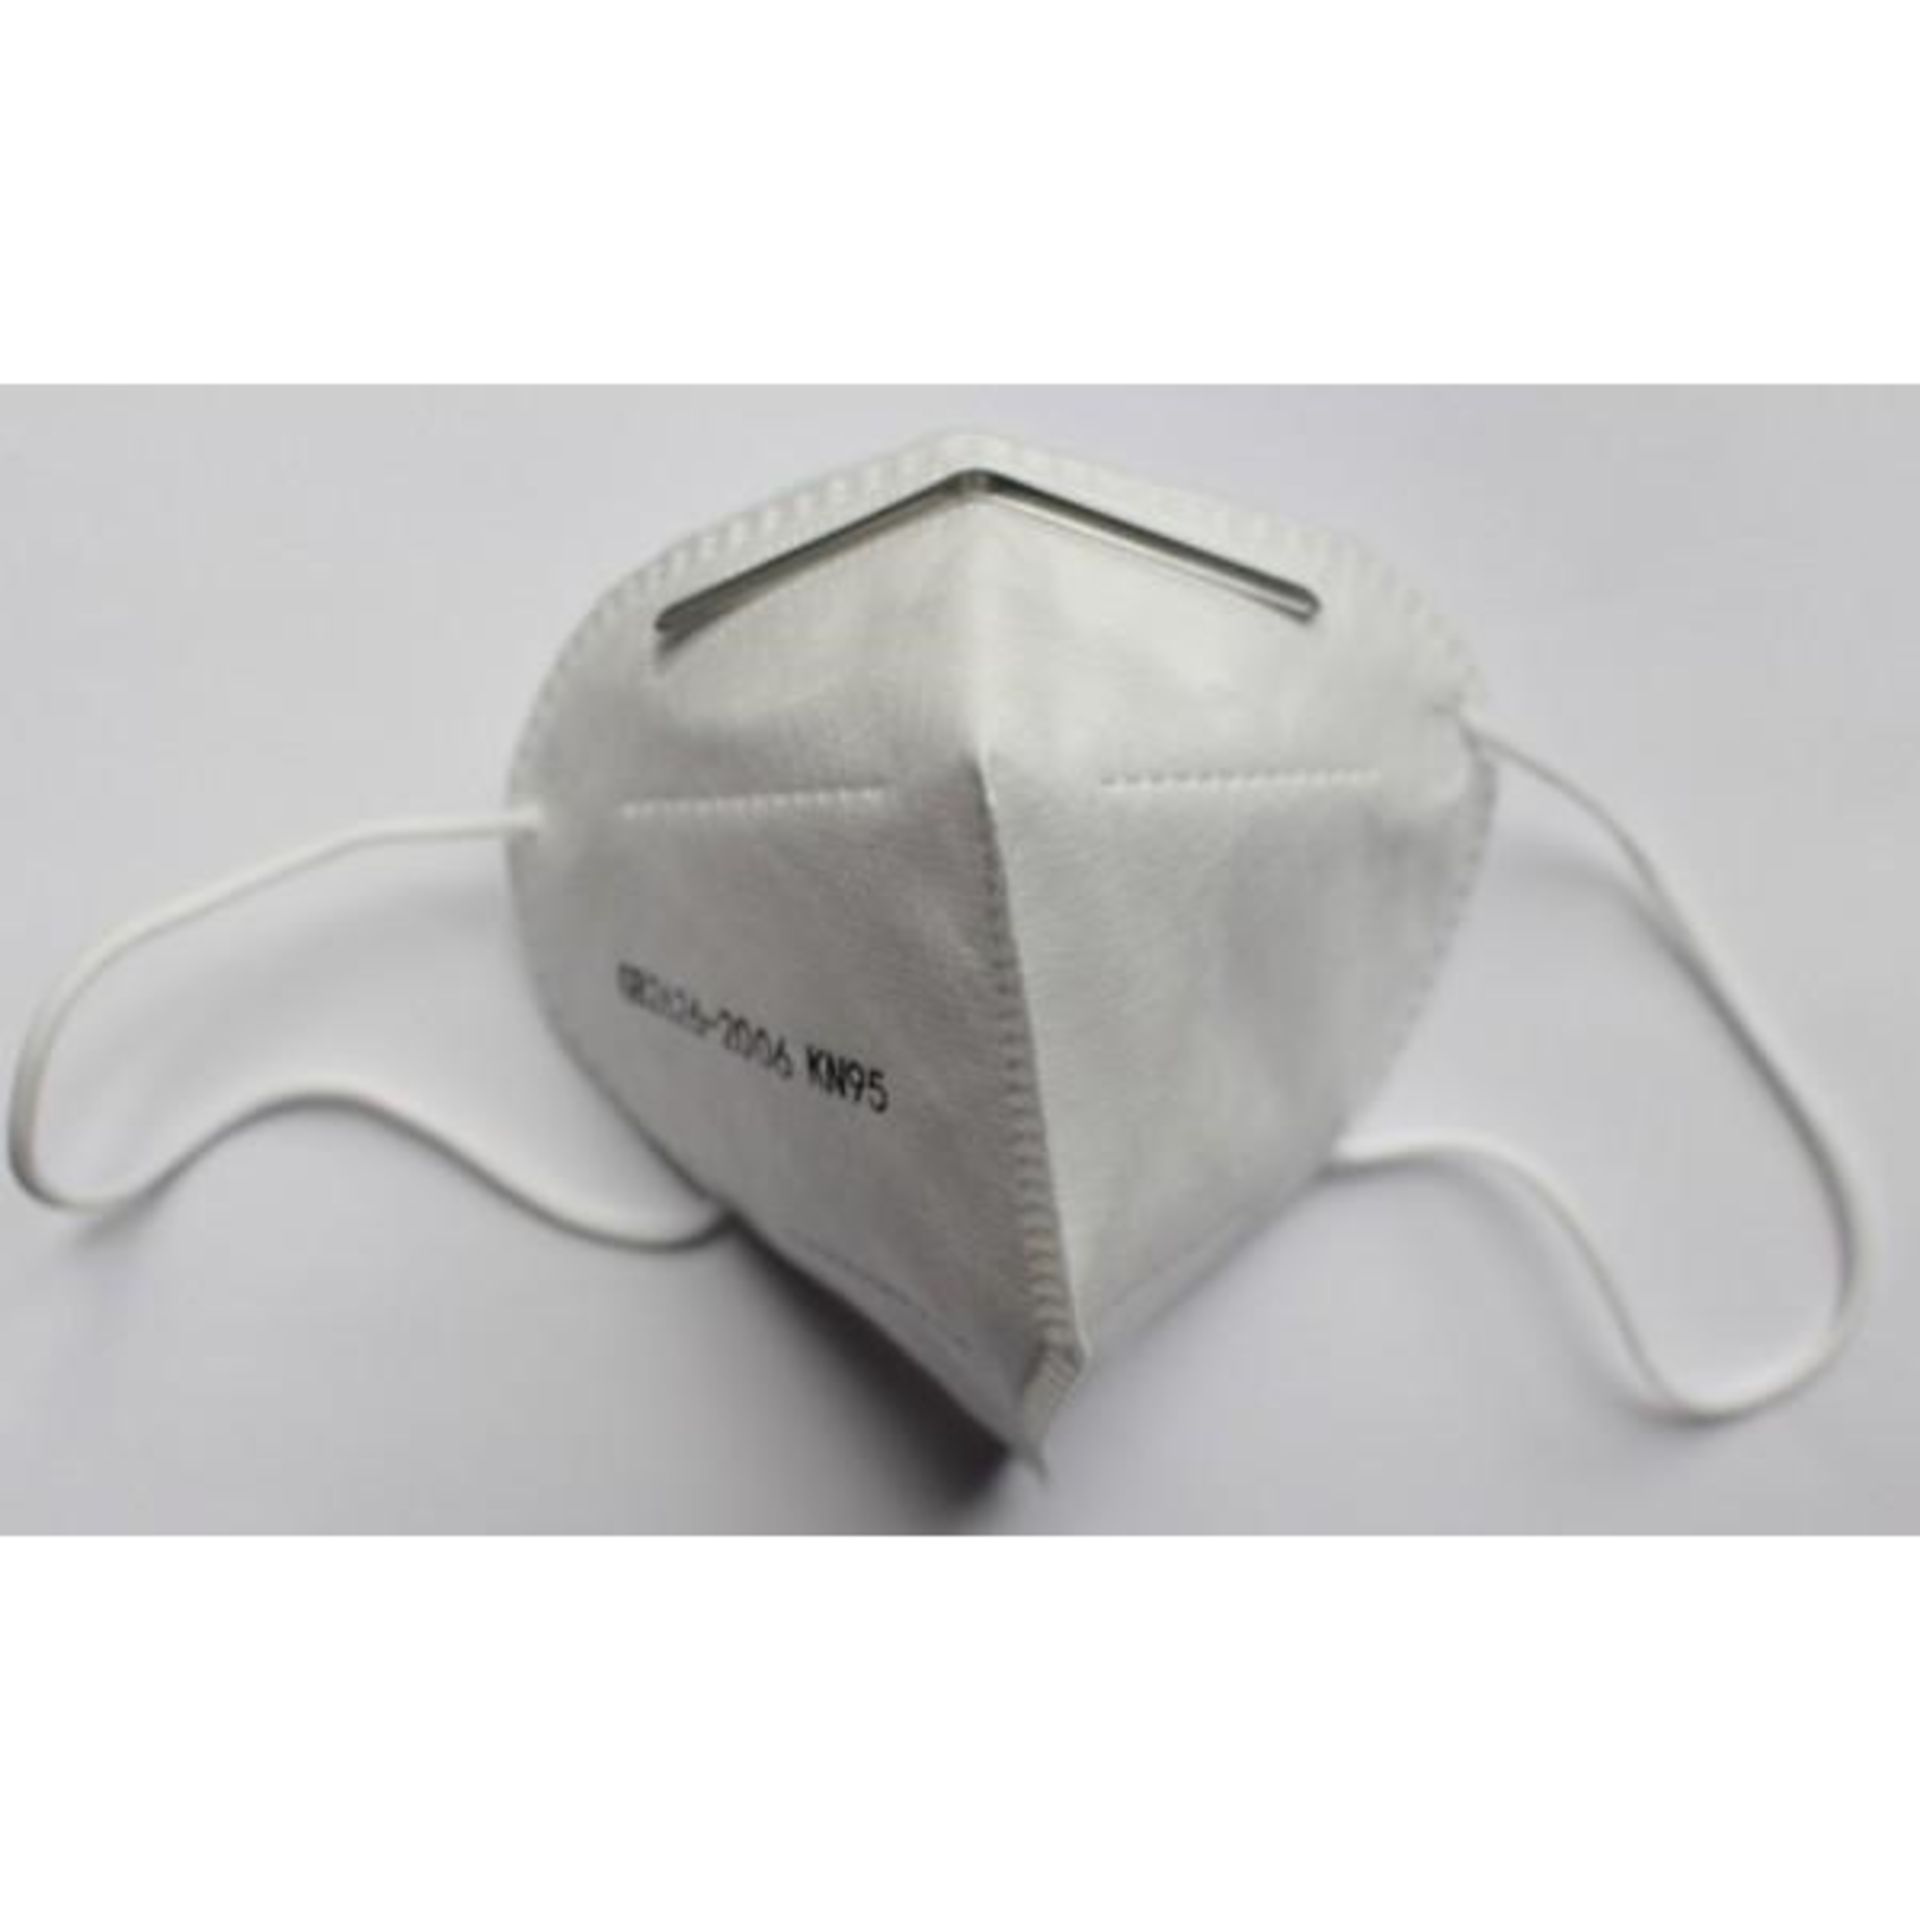 50 x Kinetic KN95 Protective Face Masks - FFP2 Grade - Meets WHO Guidance - Certified & Tested - Image 5 of 9